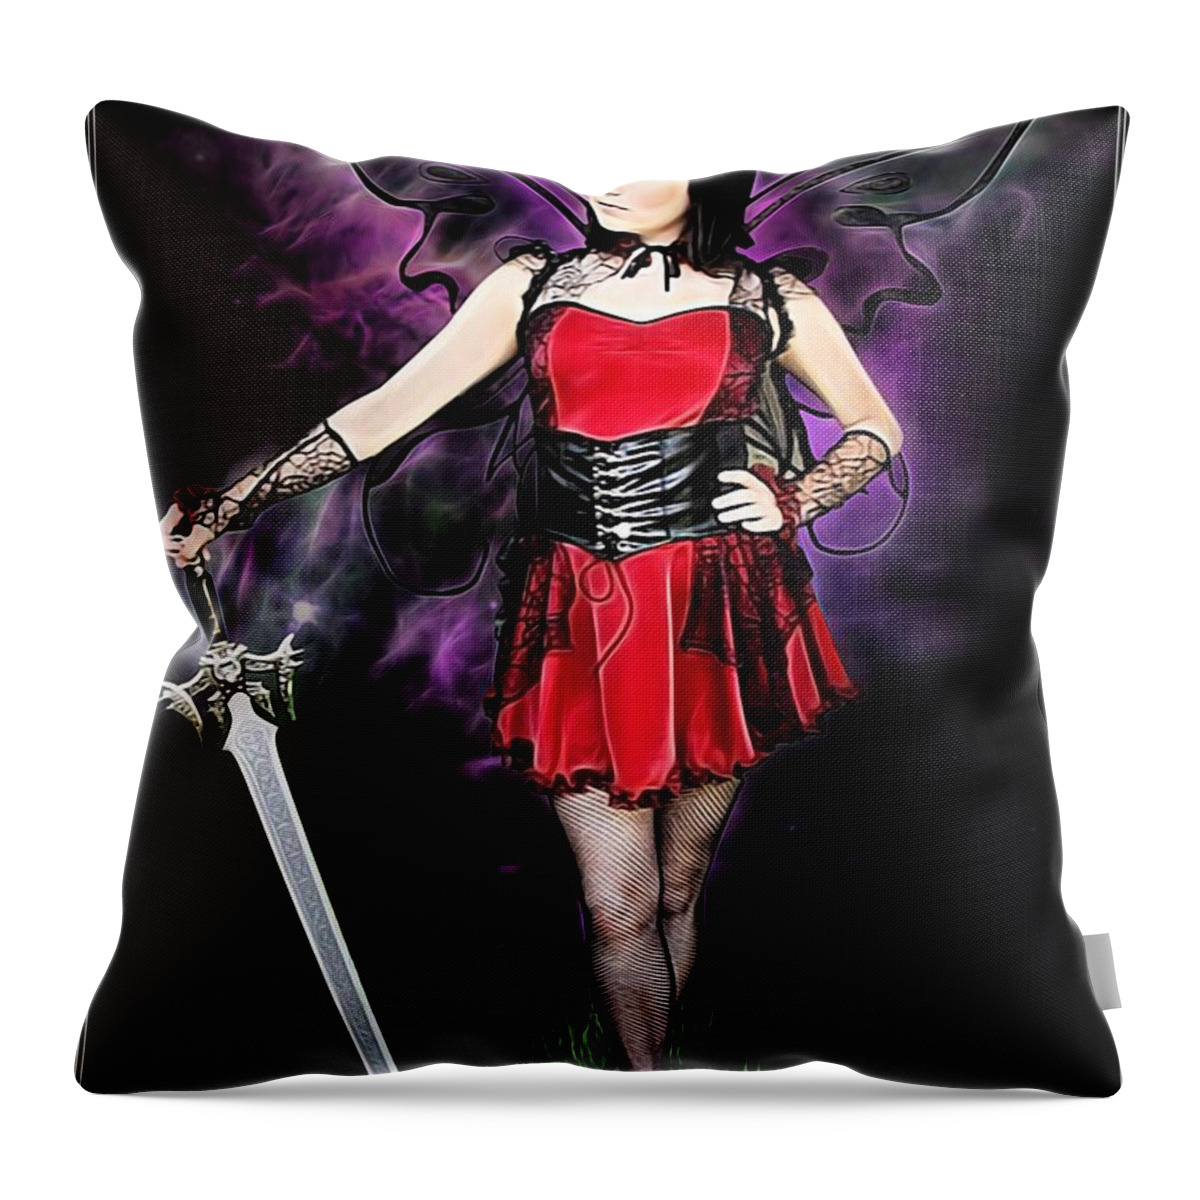 Fantasy Throw Pillow featuring the painting The Fairy Had A Sword by Jon Volden